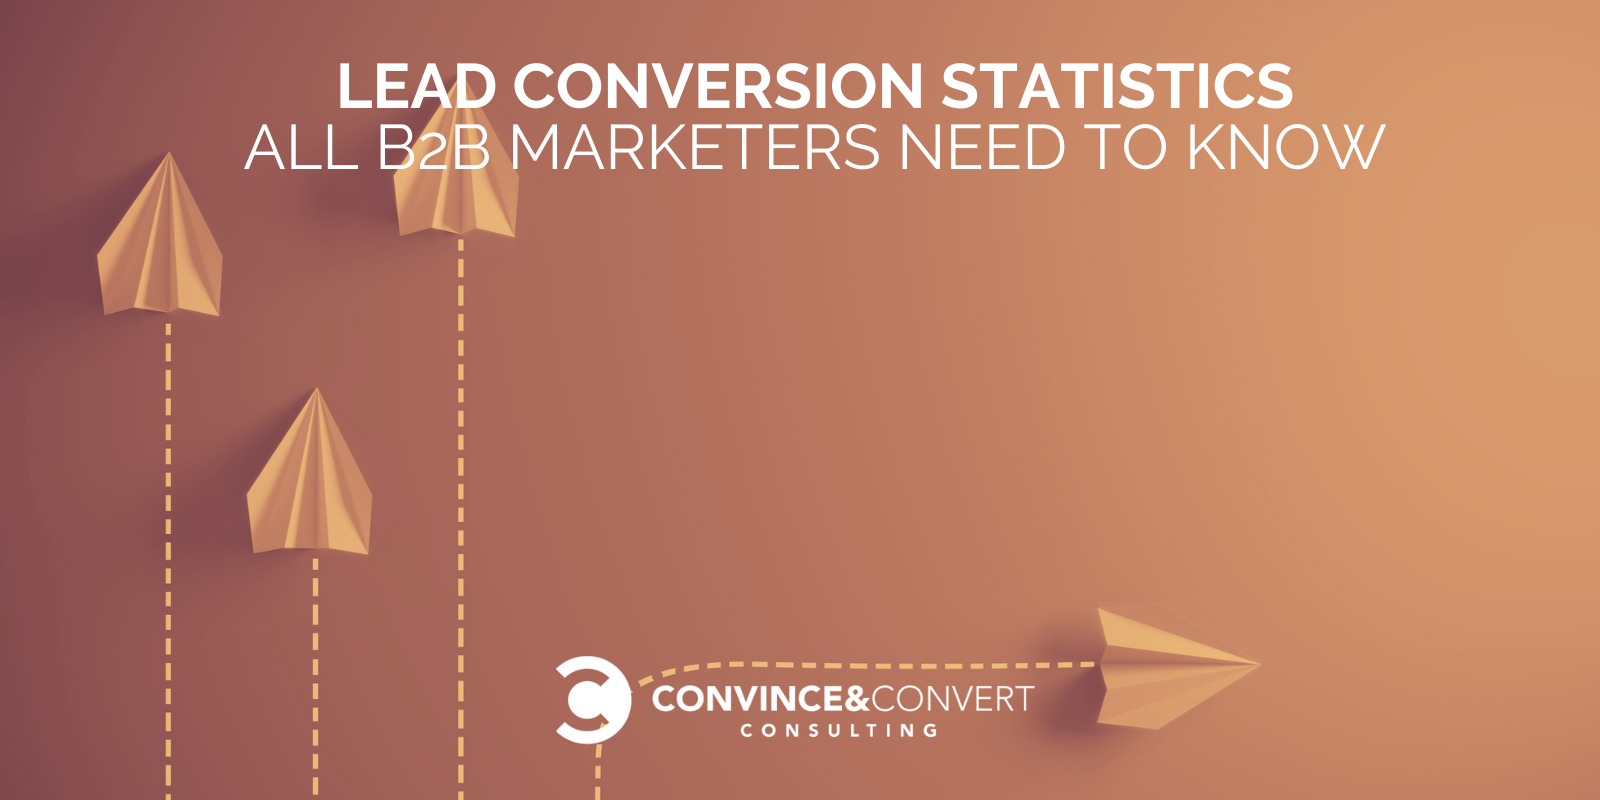 Lead Conversion Statistics All B2B Marketers Need to Know